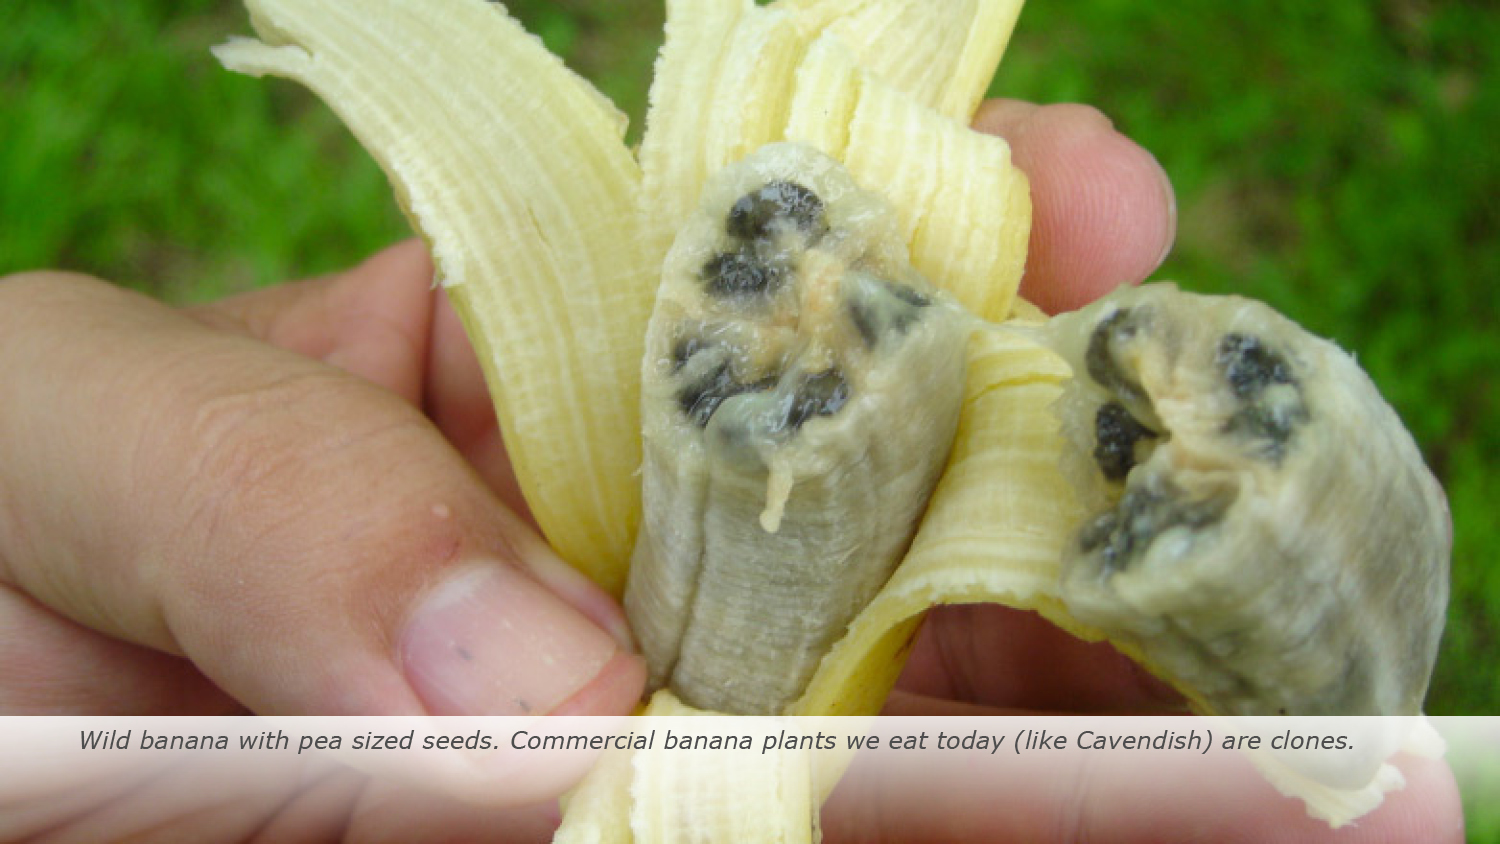 Wild banana with pea sized seeds. Commercial banana plants we eat today (like Cavendish) are clones.